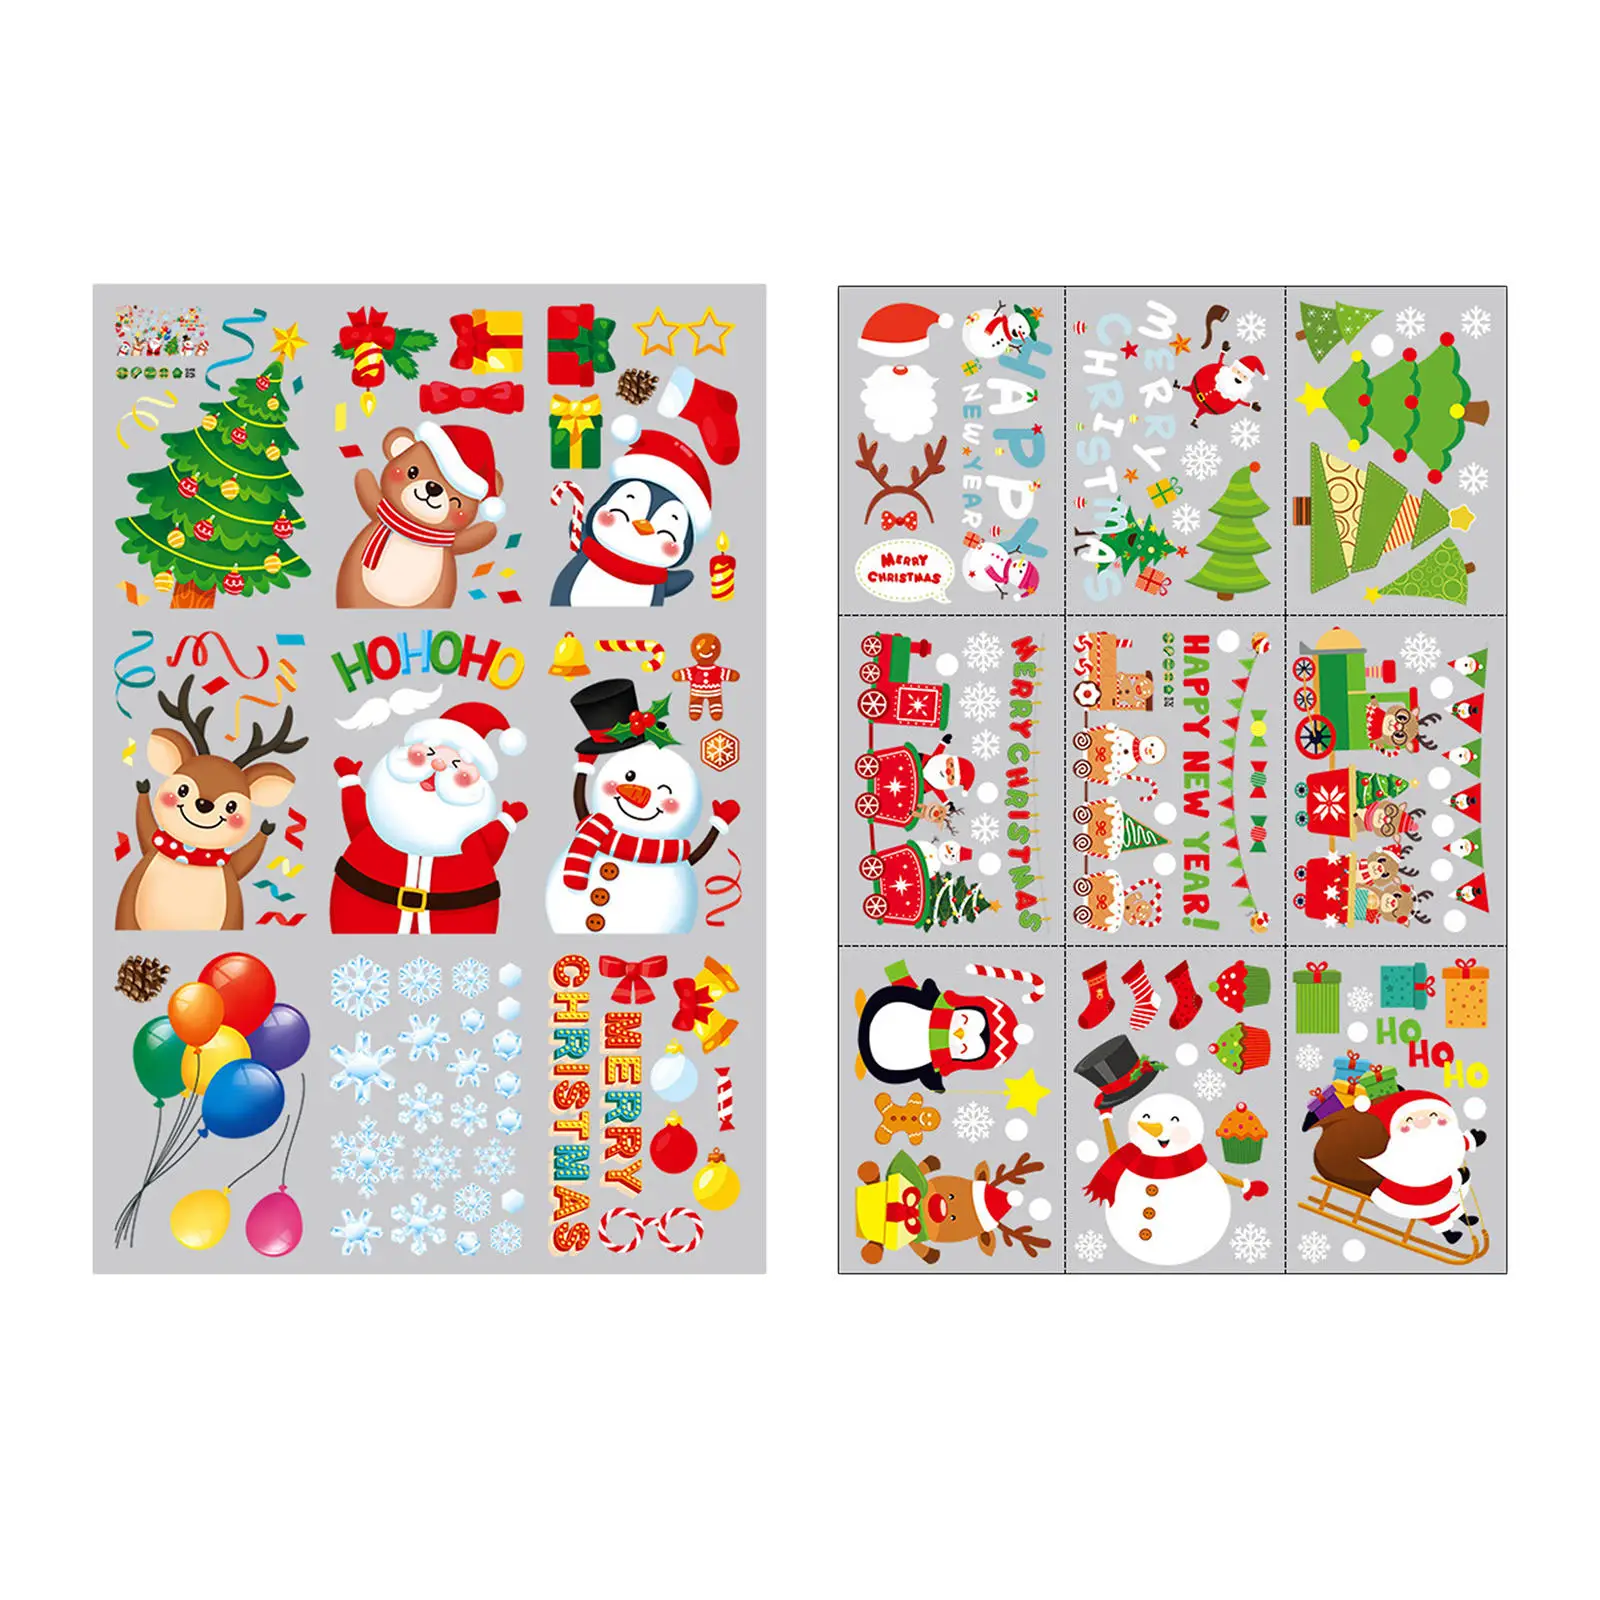 DIY Merry Christmas Wall Stickers Window Glass Stickers Christmas Decorations For Home Christmas Ornaments